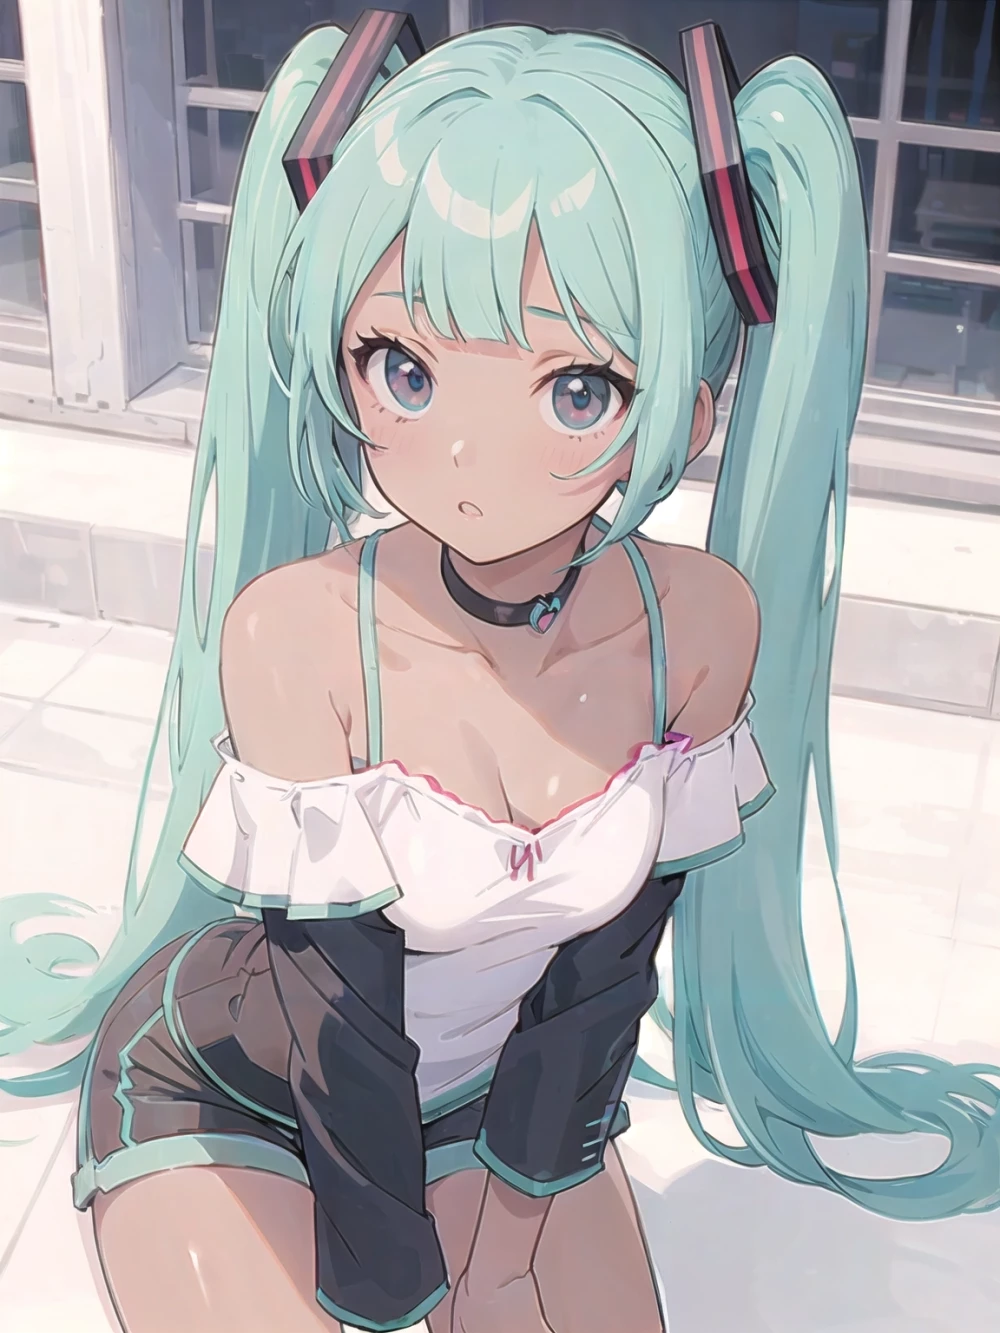 hatsune-miku-anime-style-all-ages-2-10